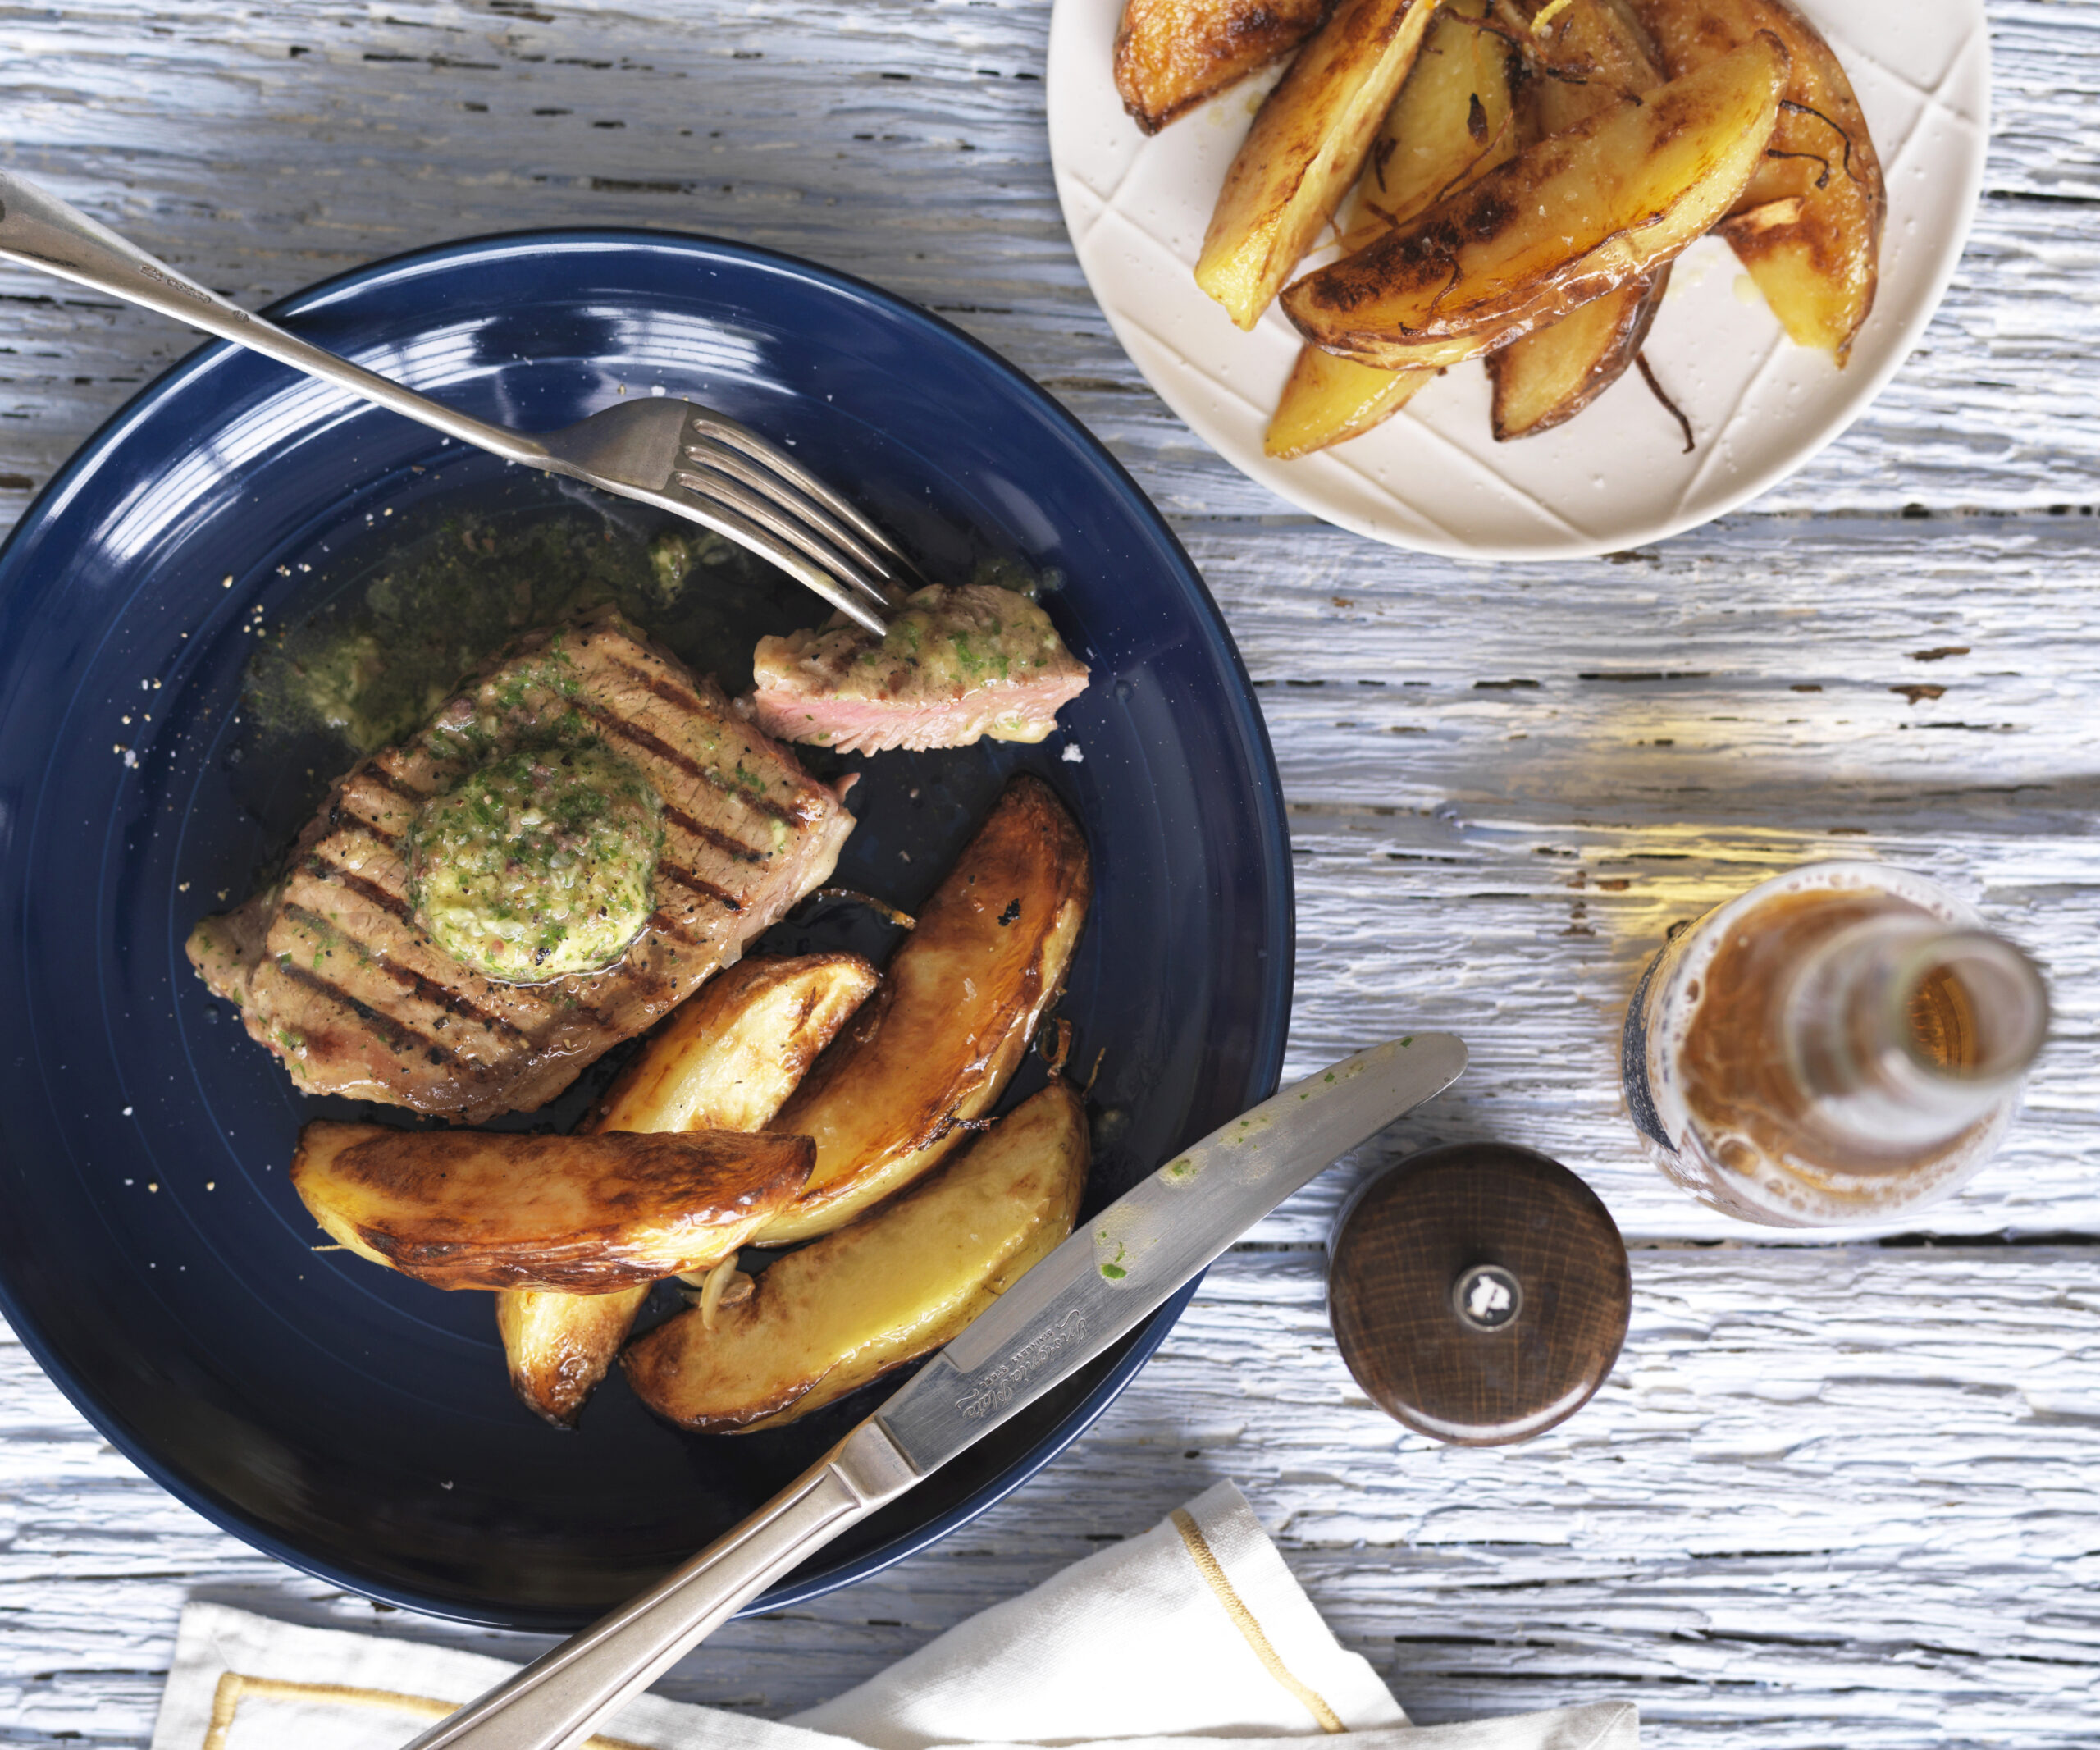 STEAK WITH ANCHOVY BUTTER